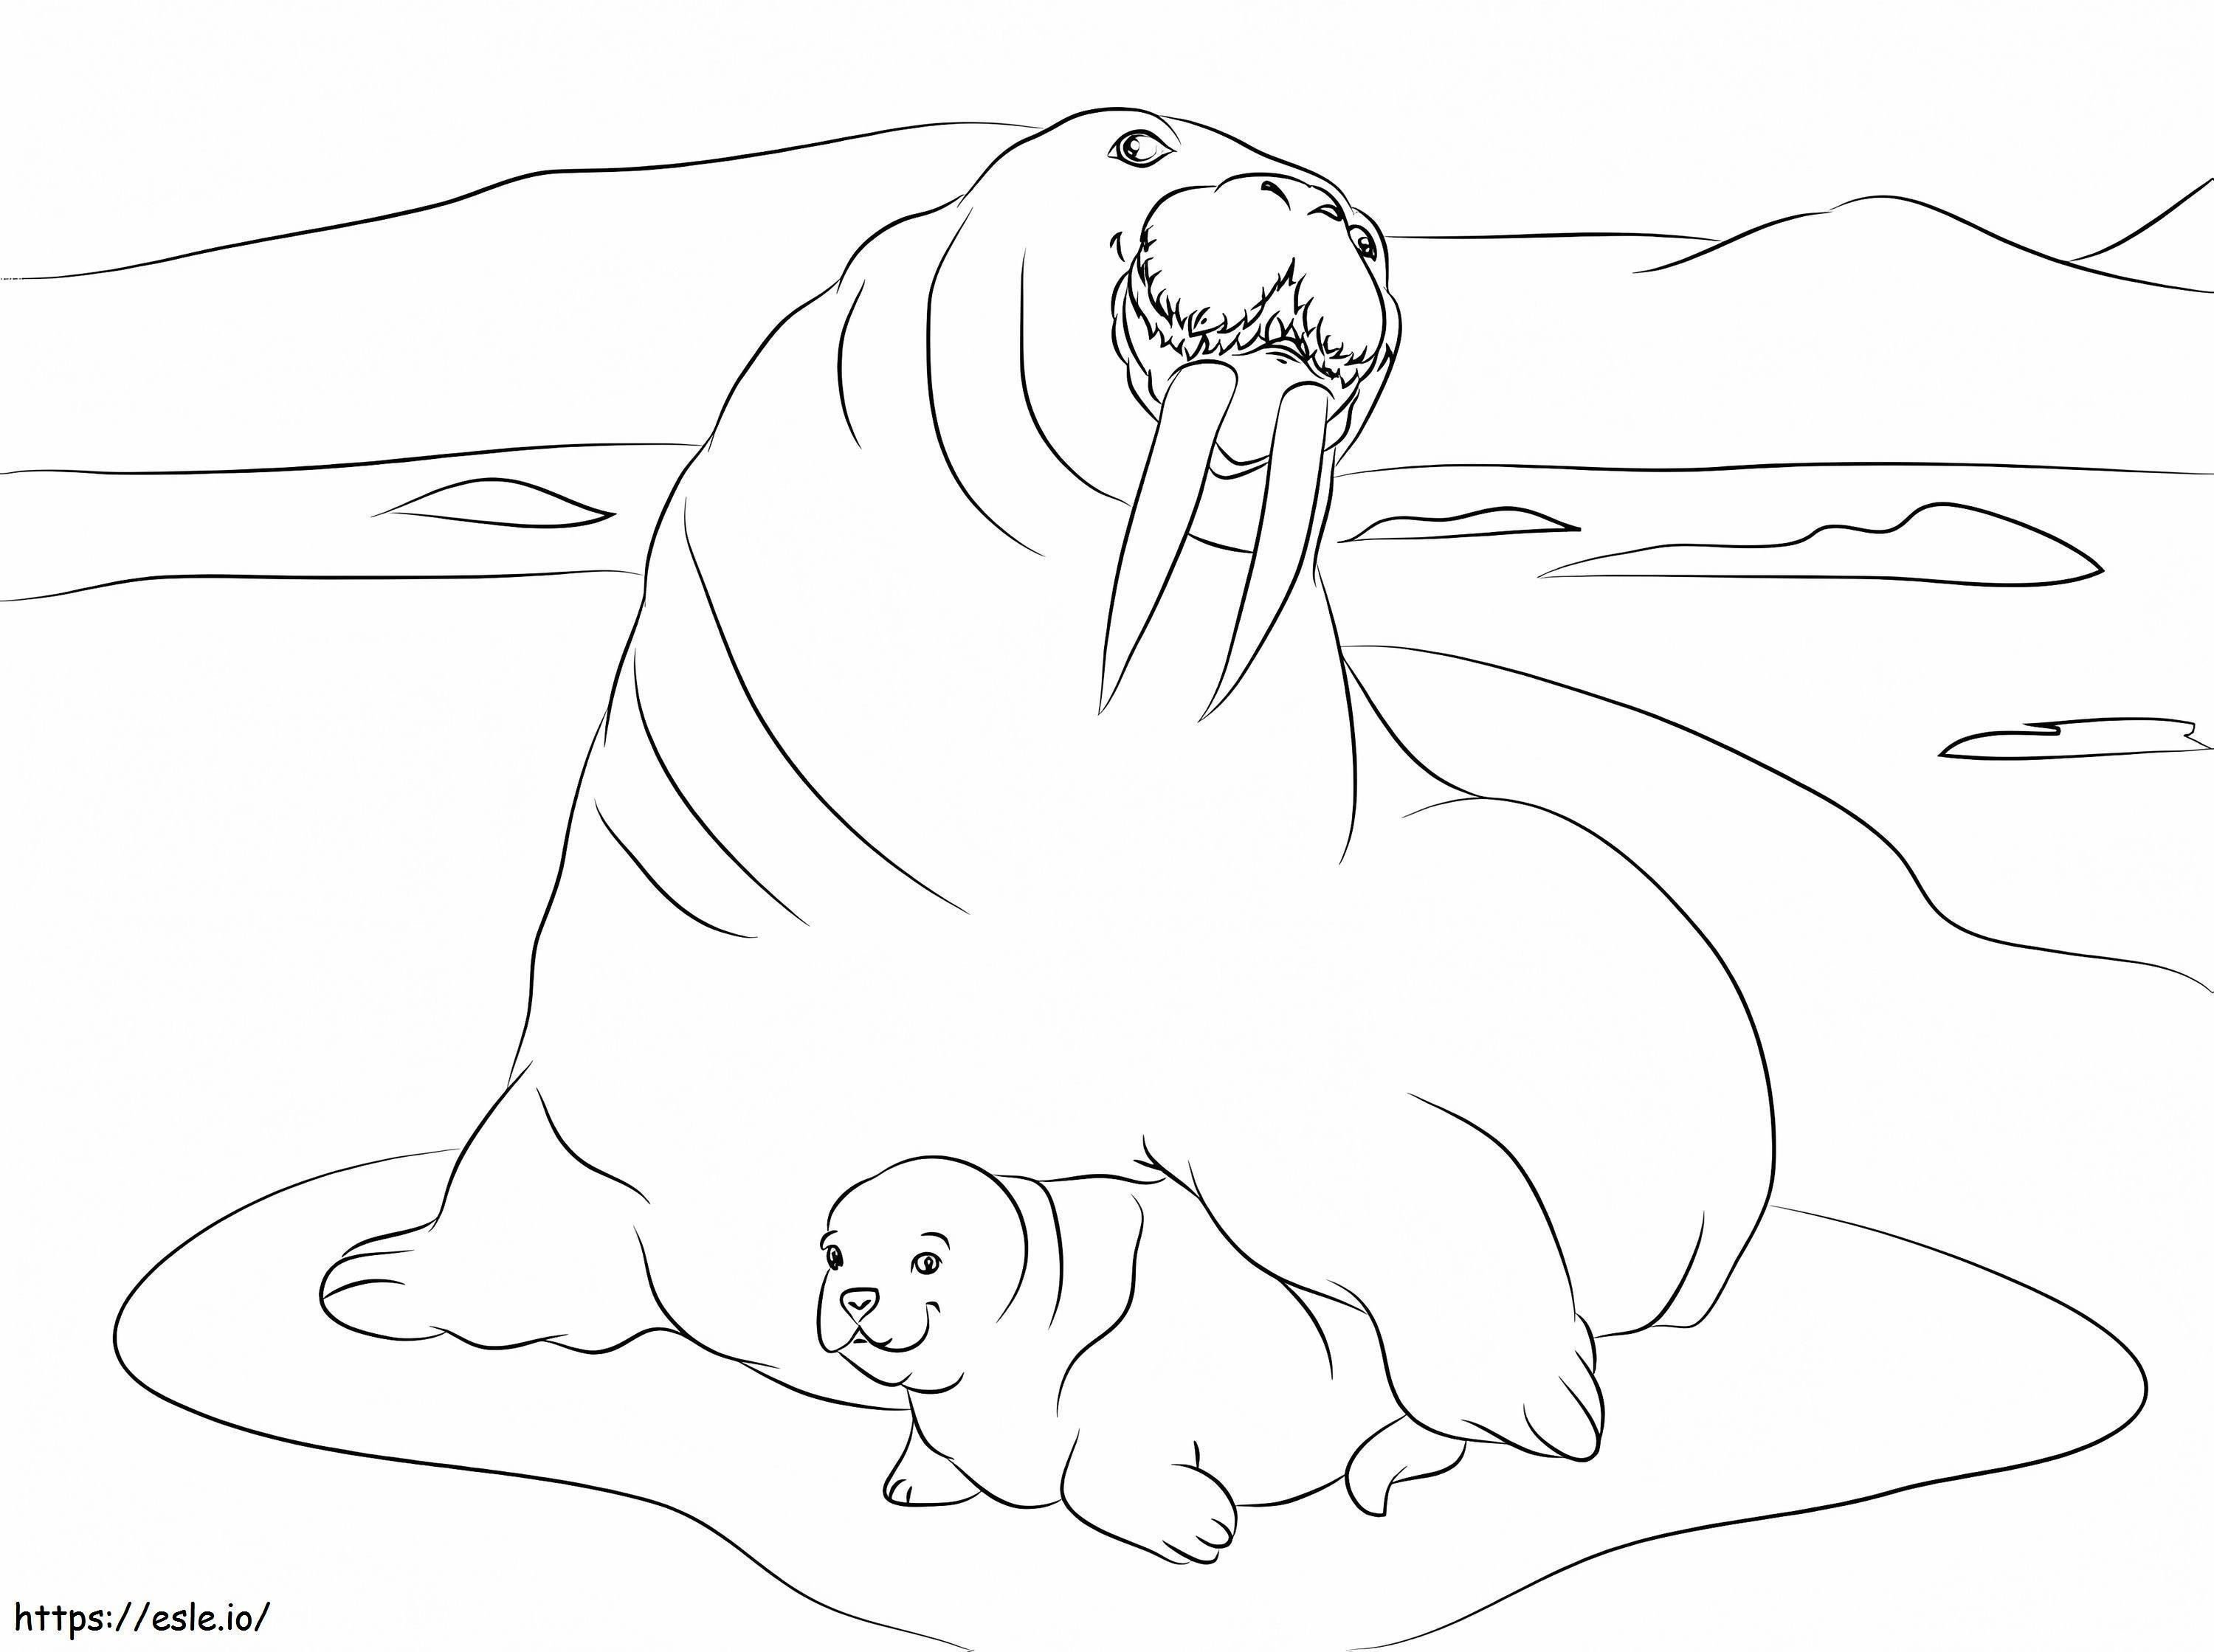 Mother And Baby Walrus coloring page